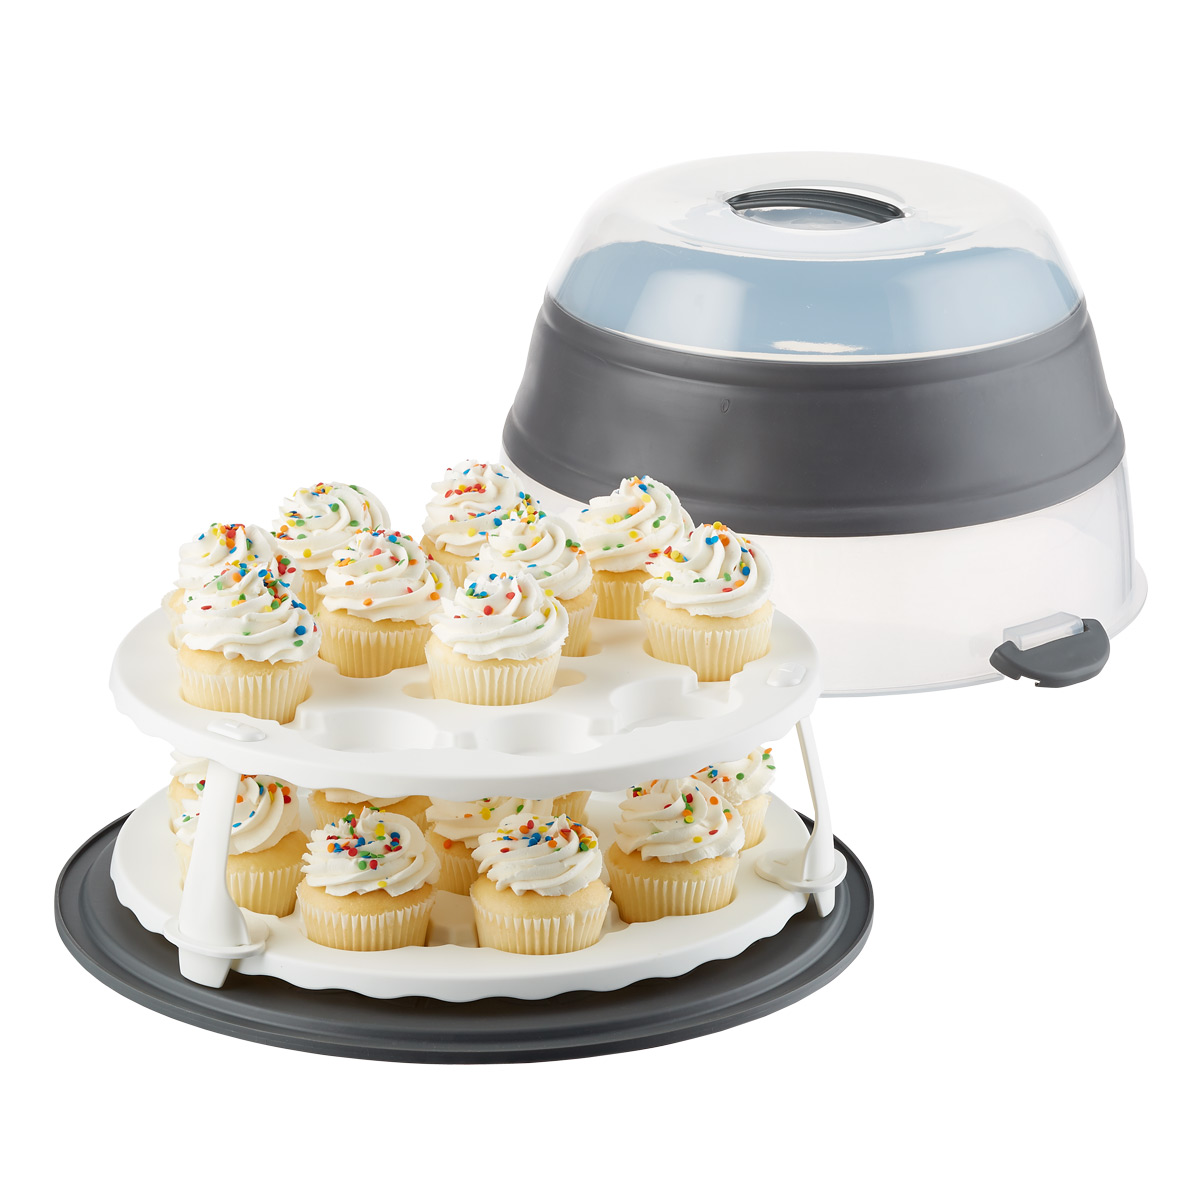 https://www.containerstore.com/catalogimages/382084/10079356-collapsable-cupcake-cake-ca.jpg